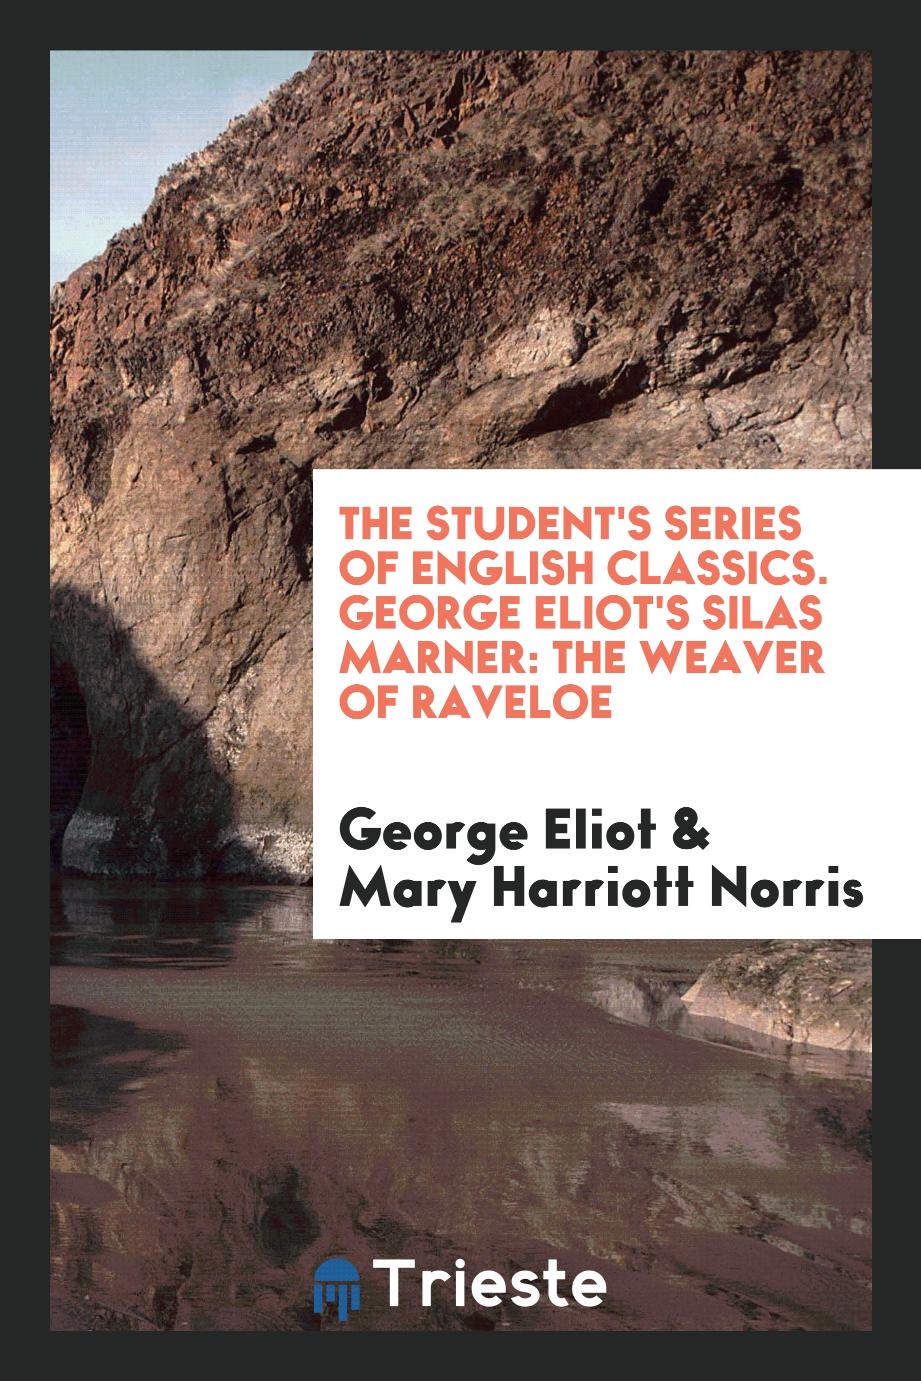 The Student's Series of English Classics. George Eliot's Silas Marner: The Weaver of Raveloe